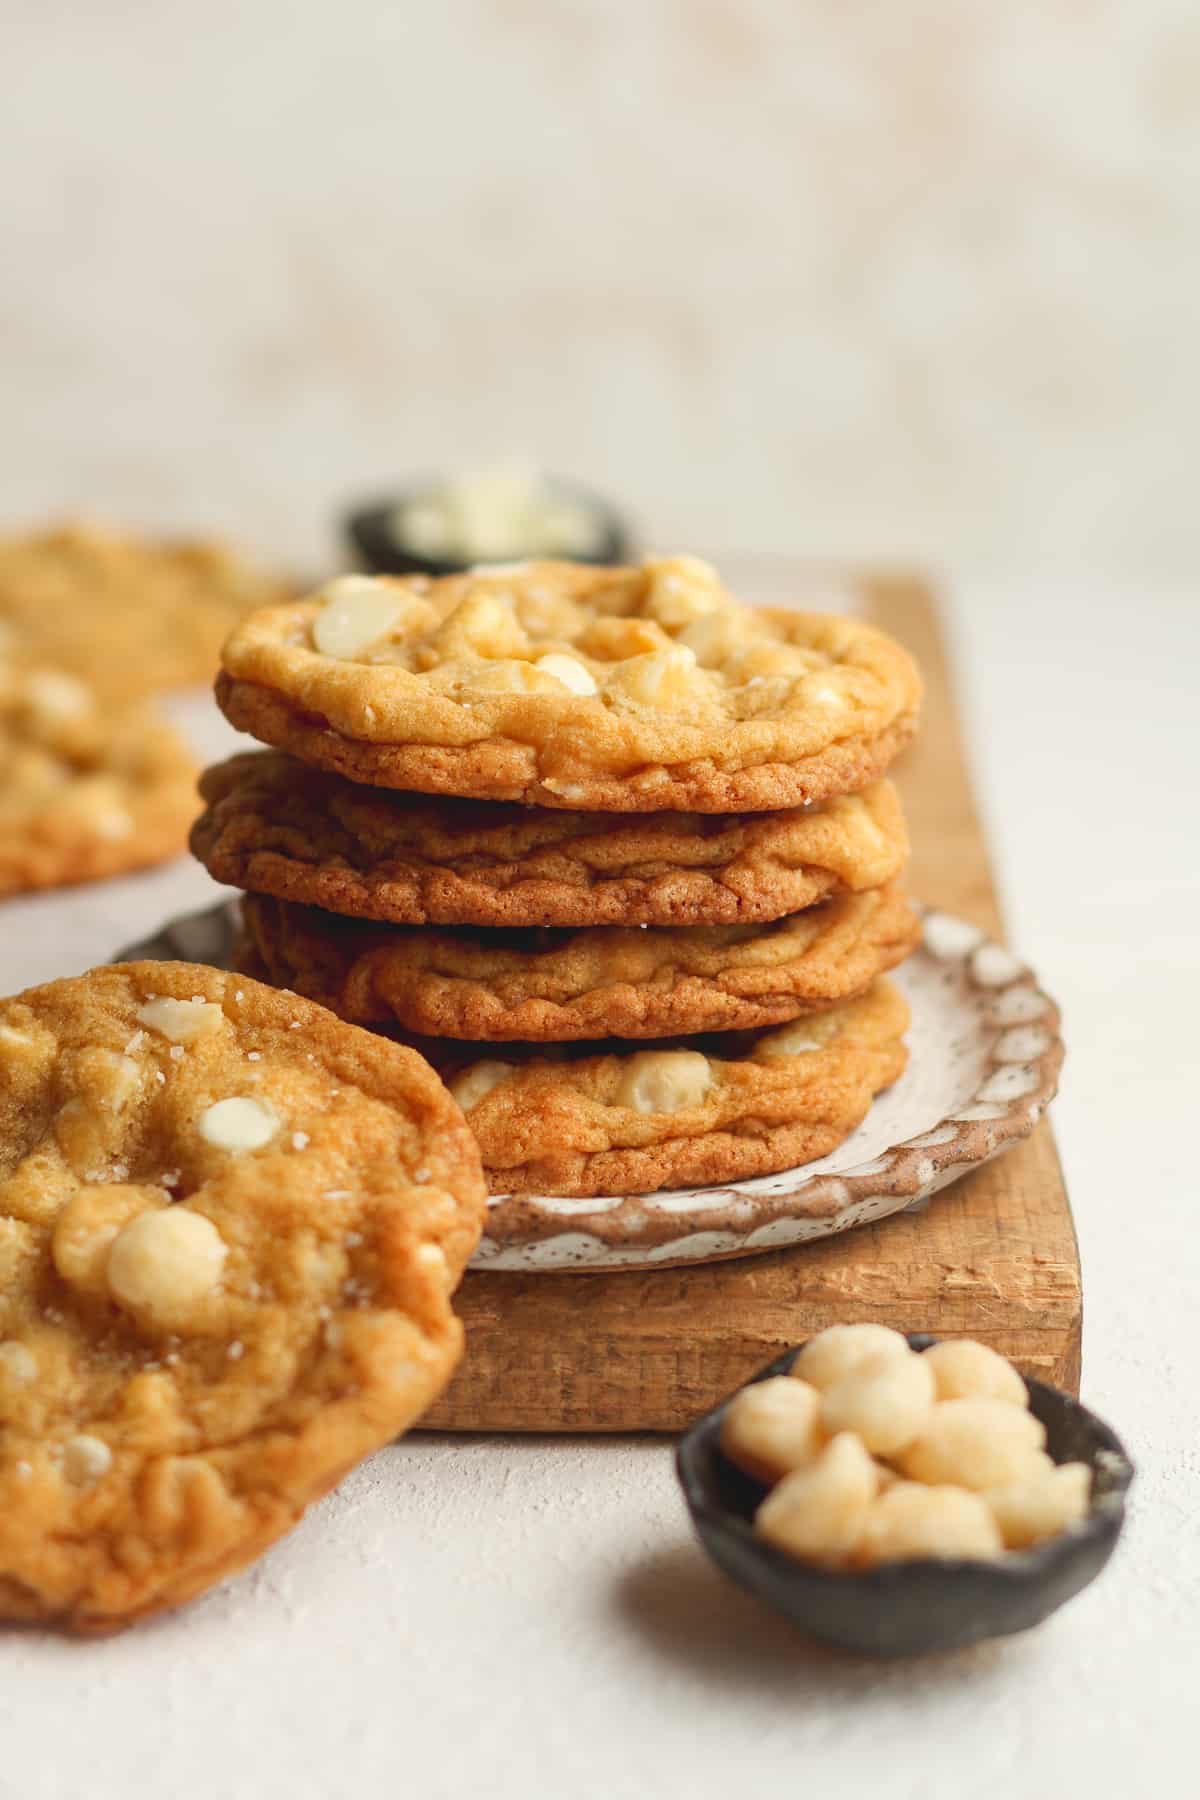 A small plate of four stacked white chocolate cookies with macadamia nuts.